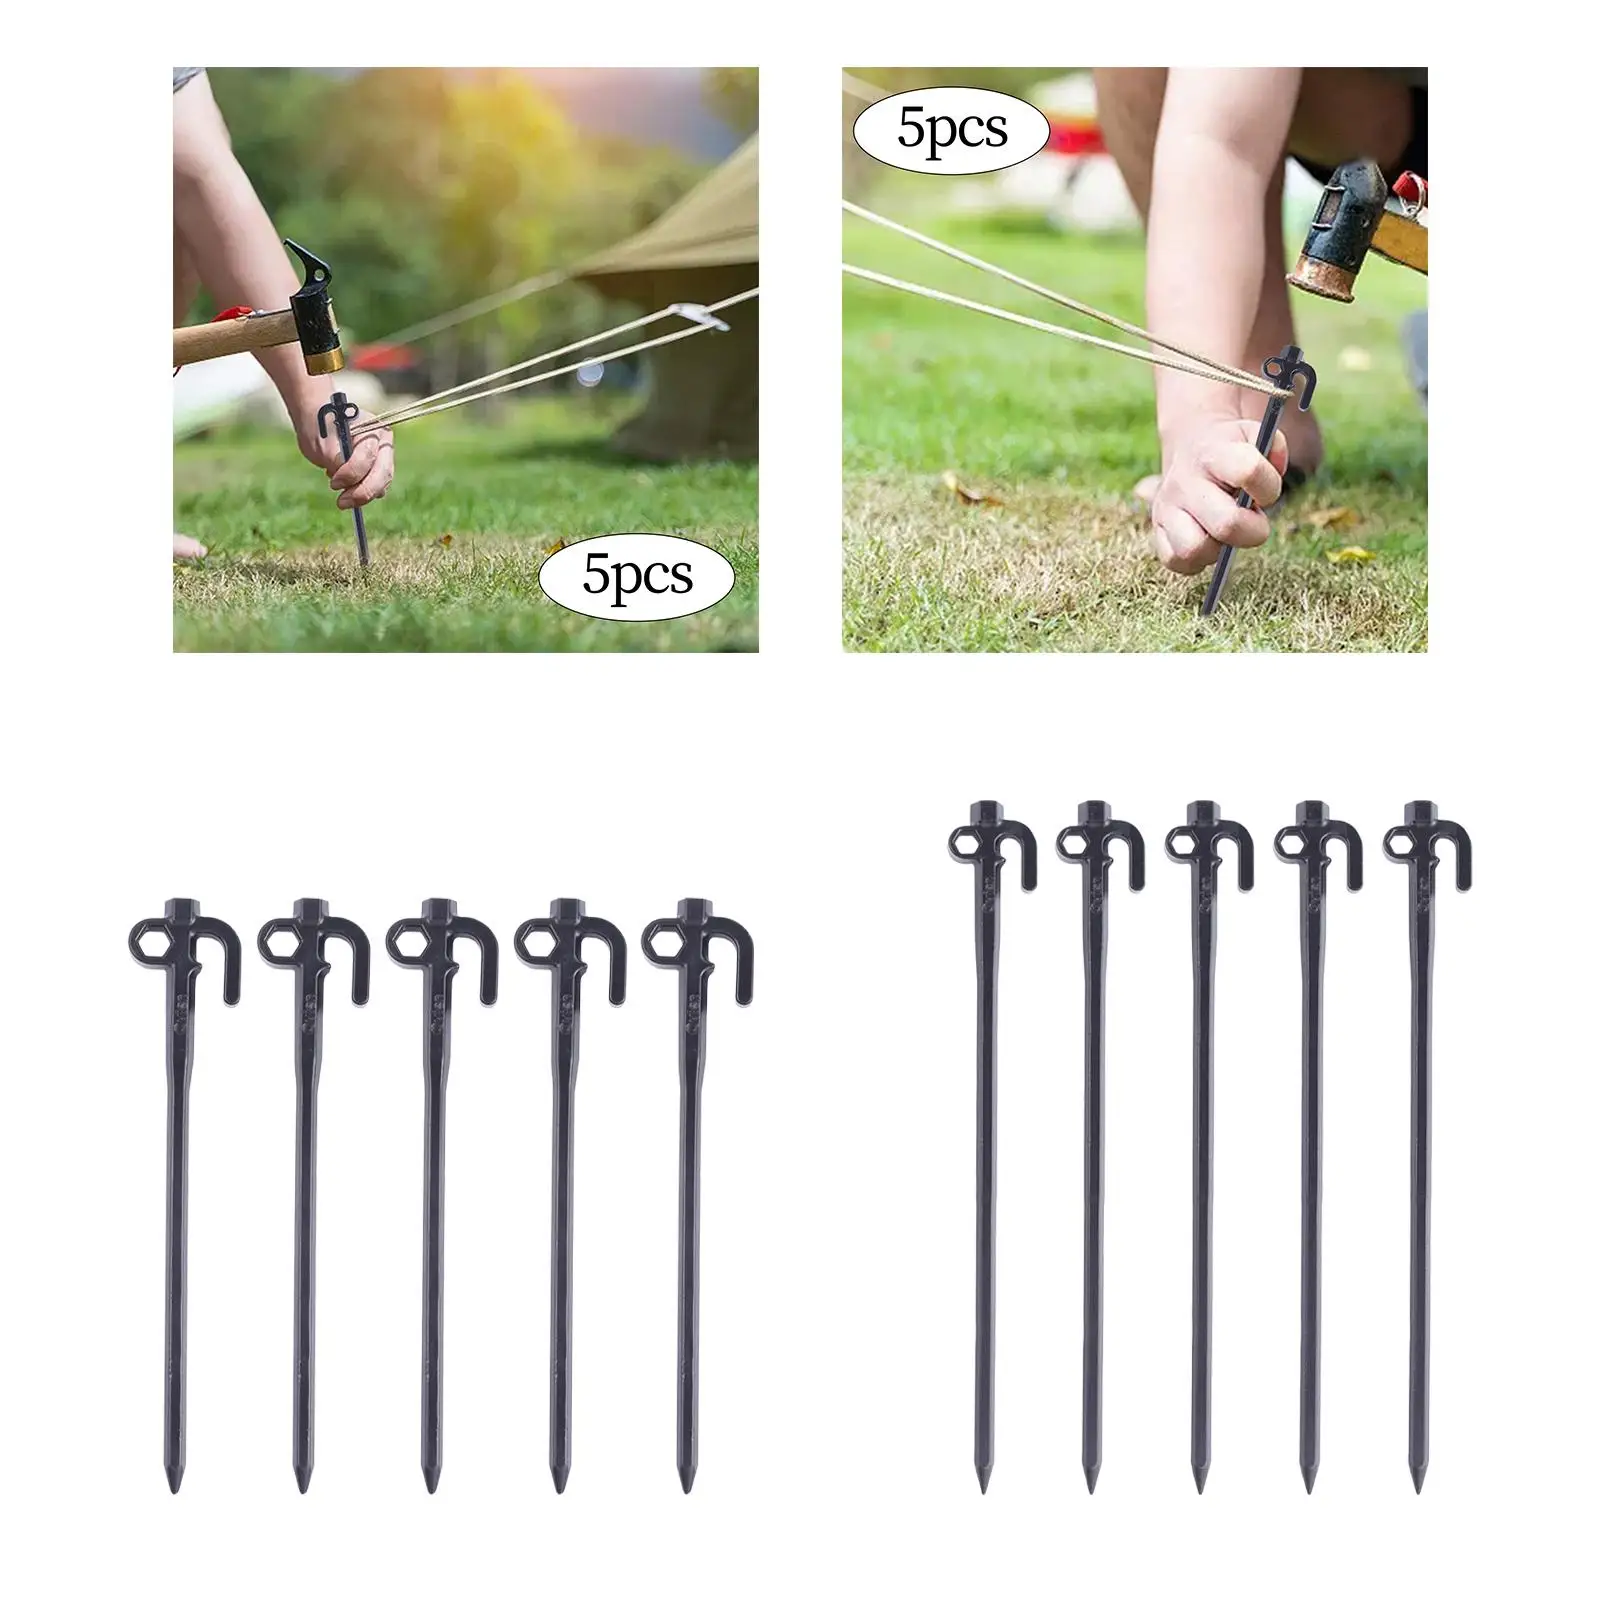 5Pcs Ground Nails Hammocks Places Tent Stakes for Backpacking